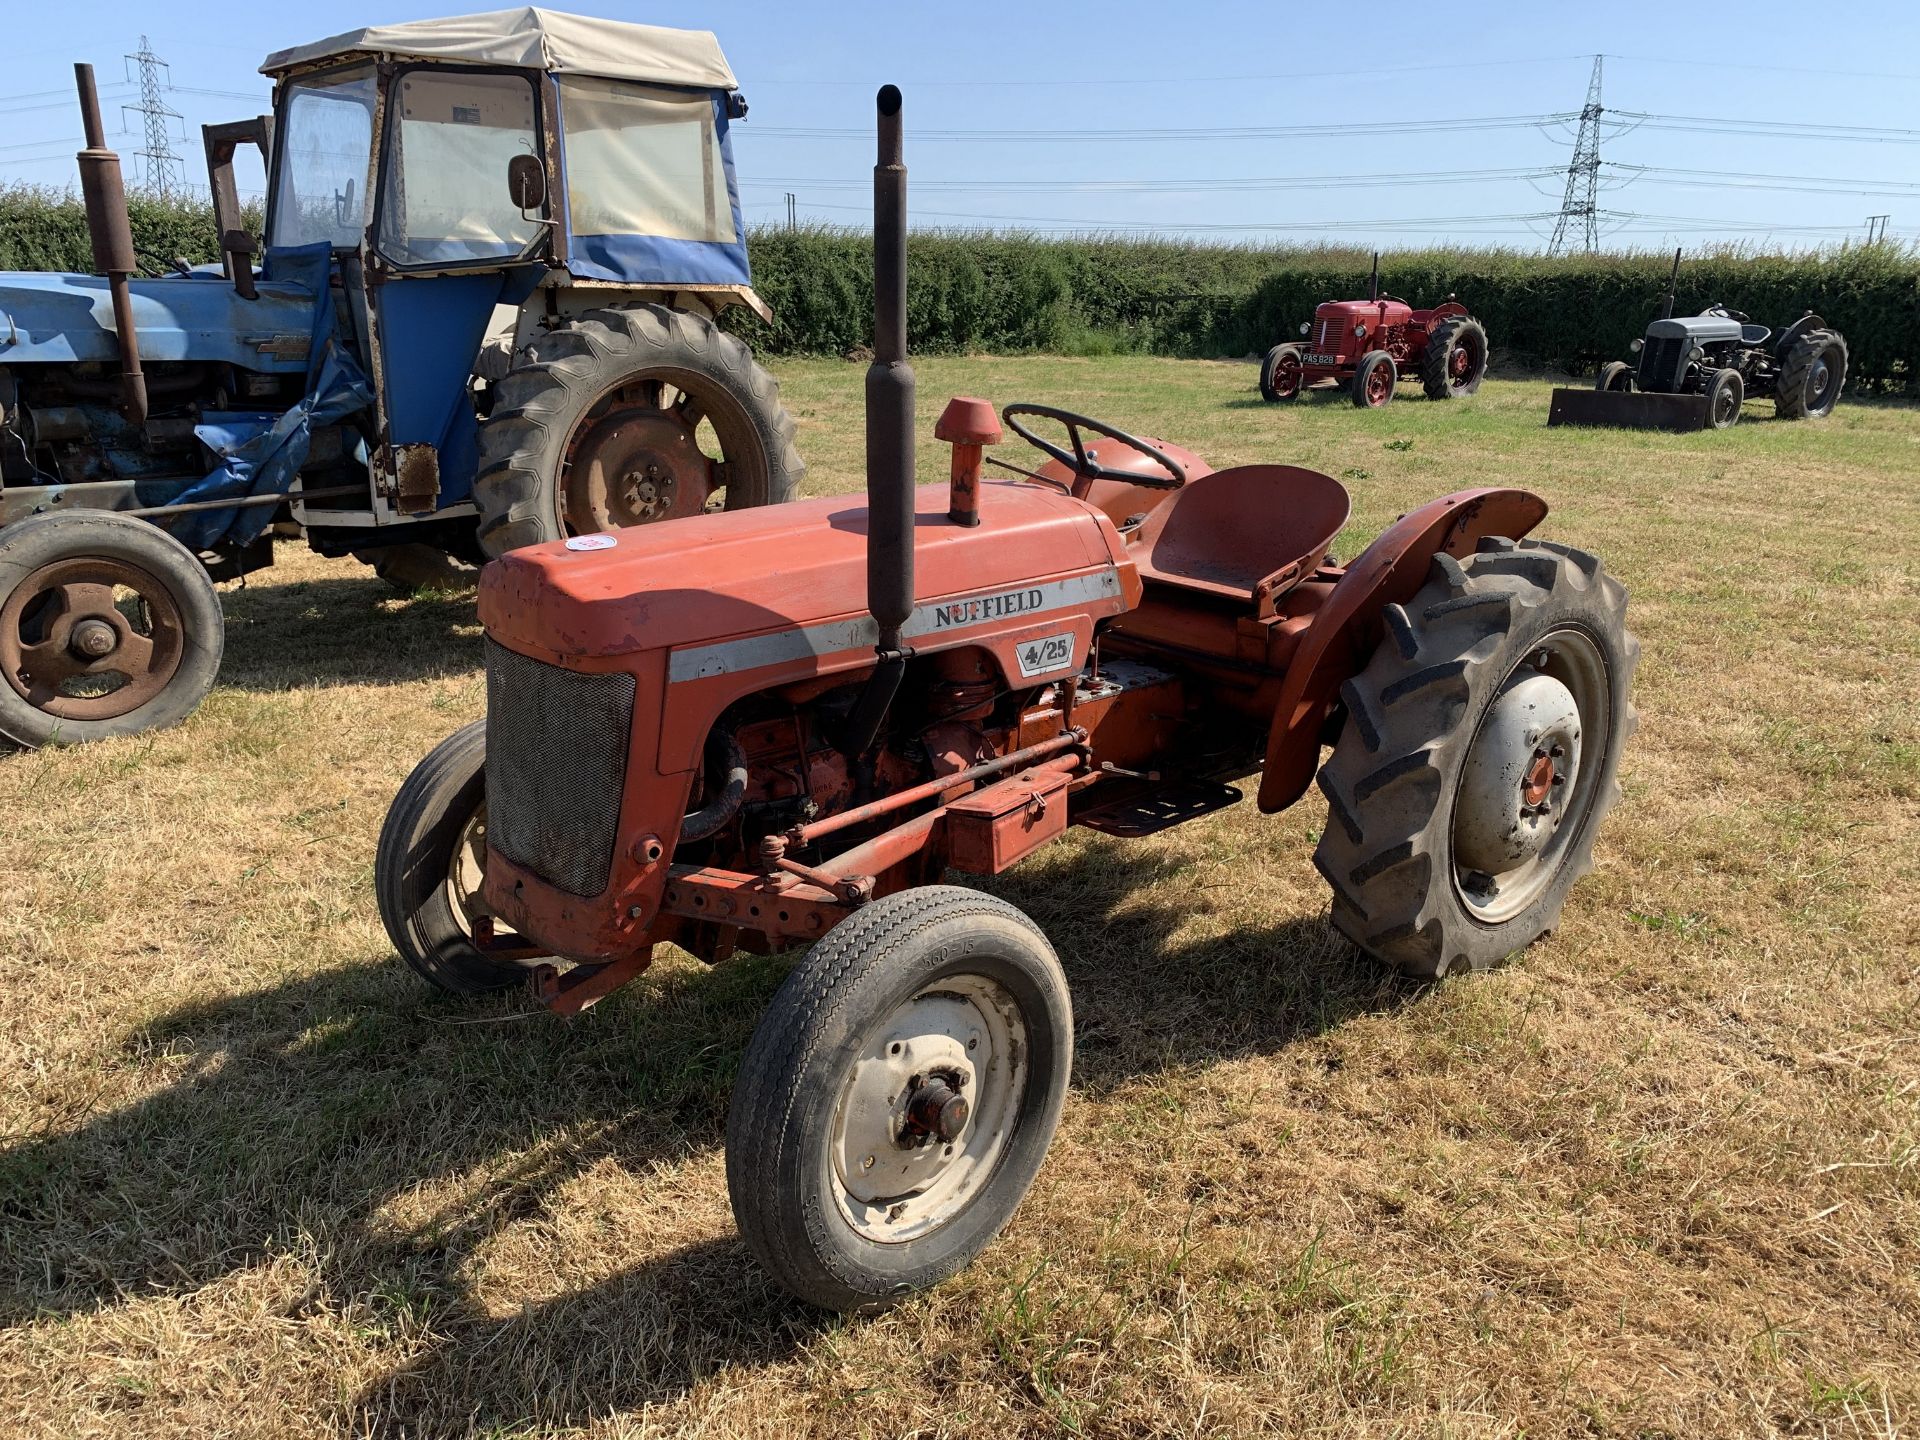 NO VAT Nuffield 4/25 tractor, 1526 hours